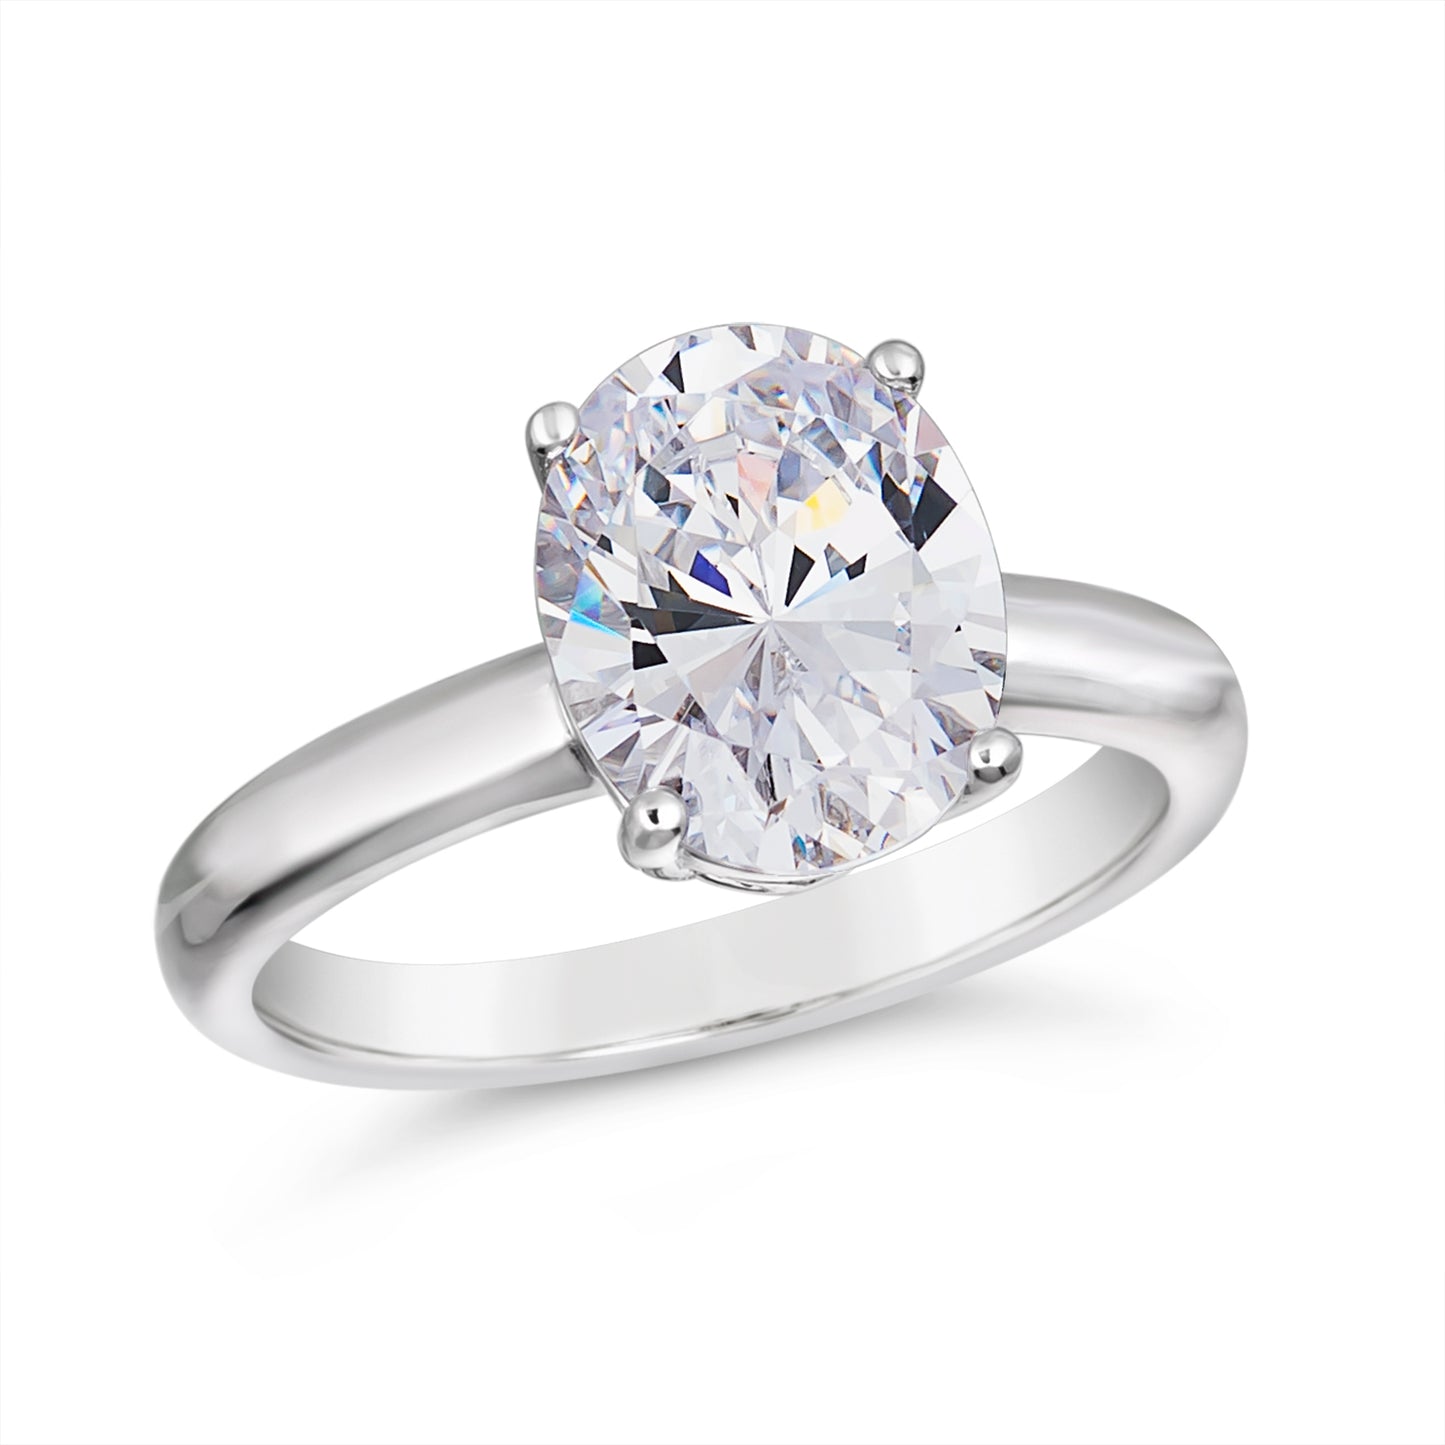 4 Carat Oval Solitaire Ring